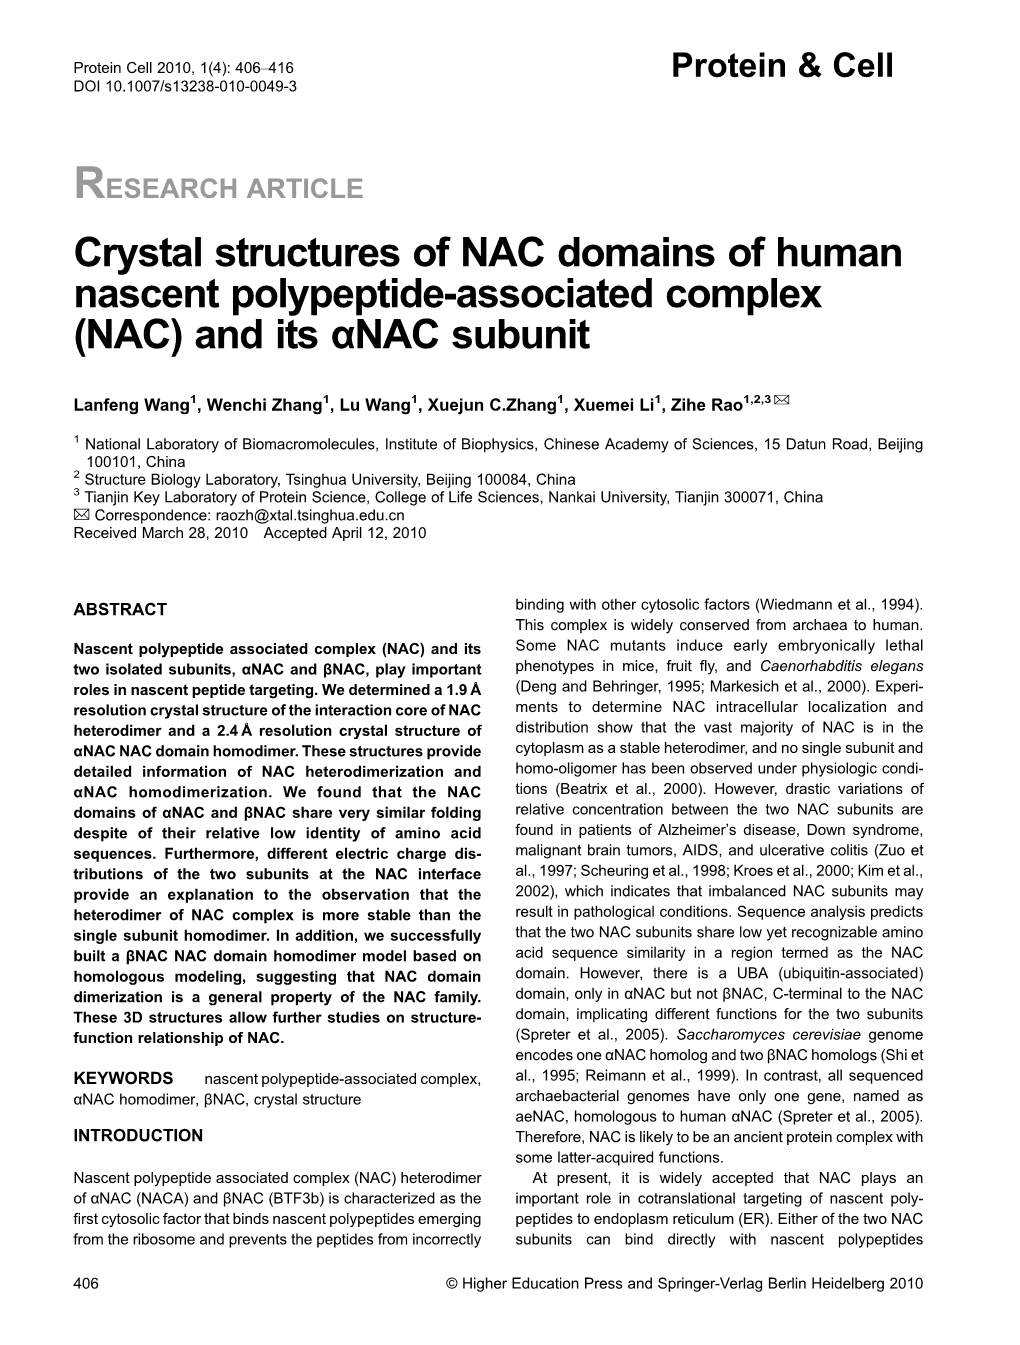 Crystal Structures of NAC Domains of Human Nascent Polypeptide-Associated Complex (NAC) and Its Αnac Subunit